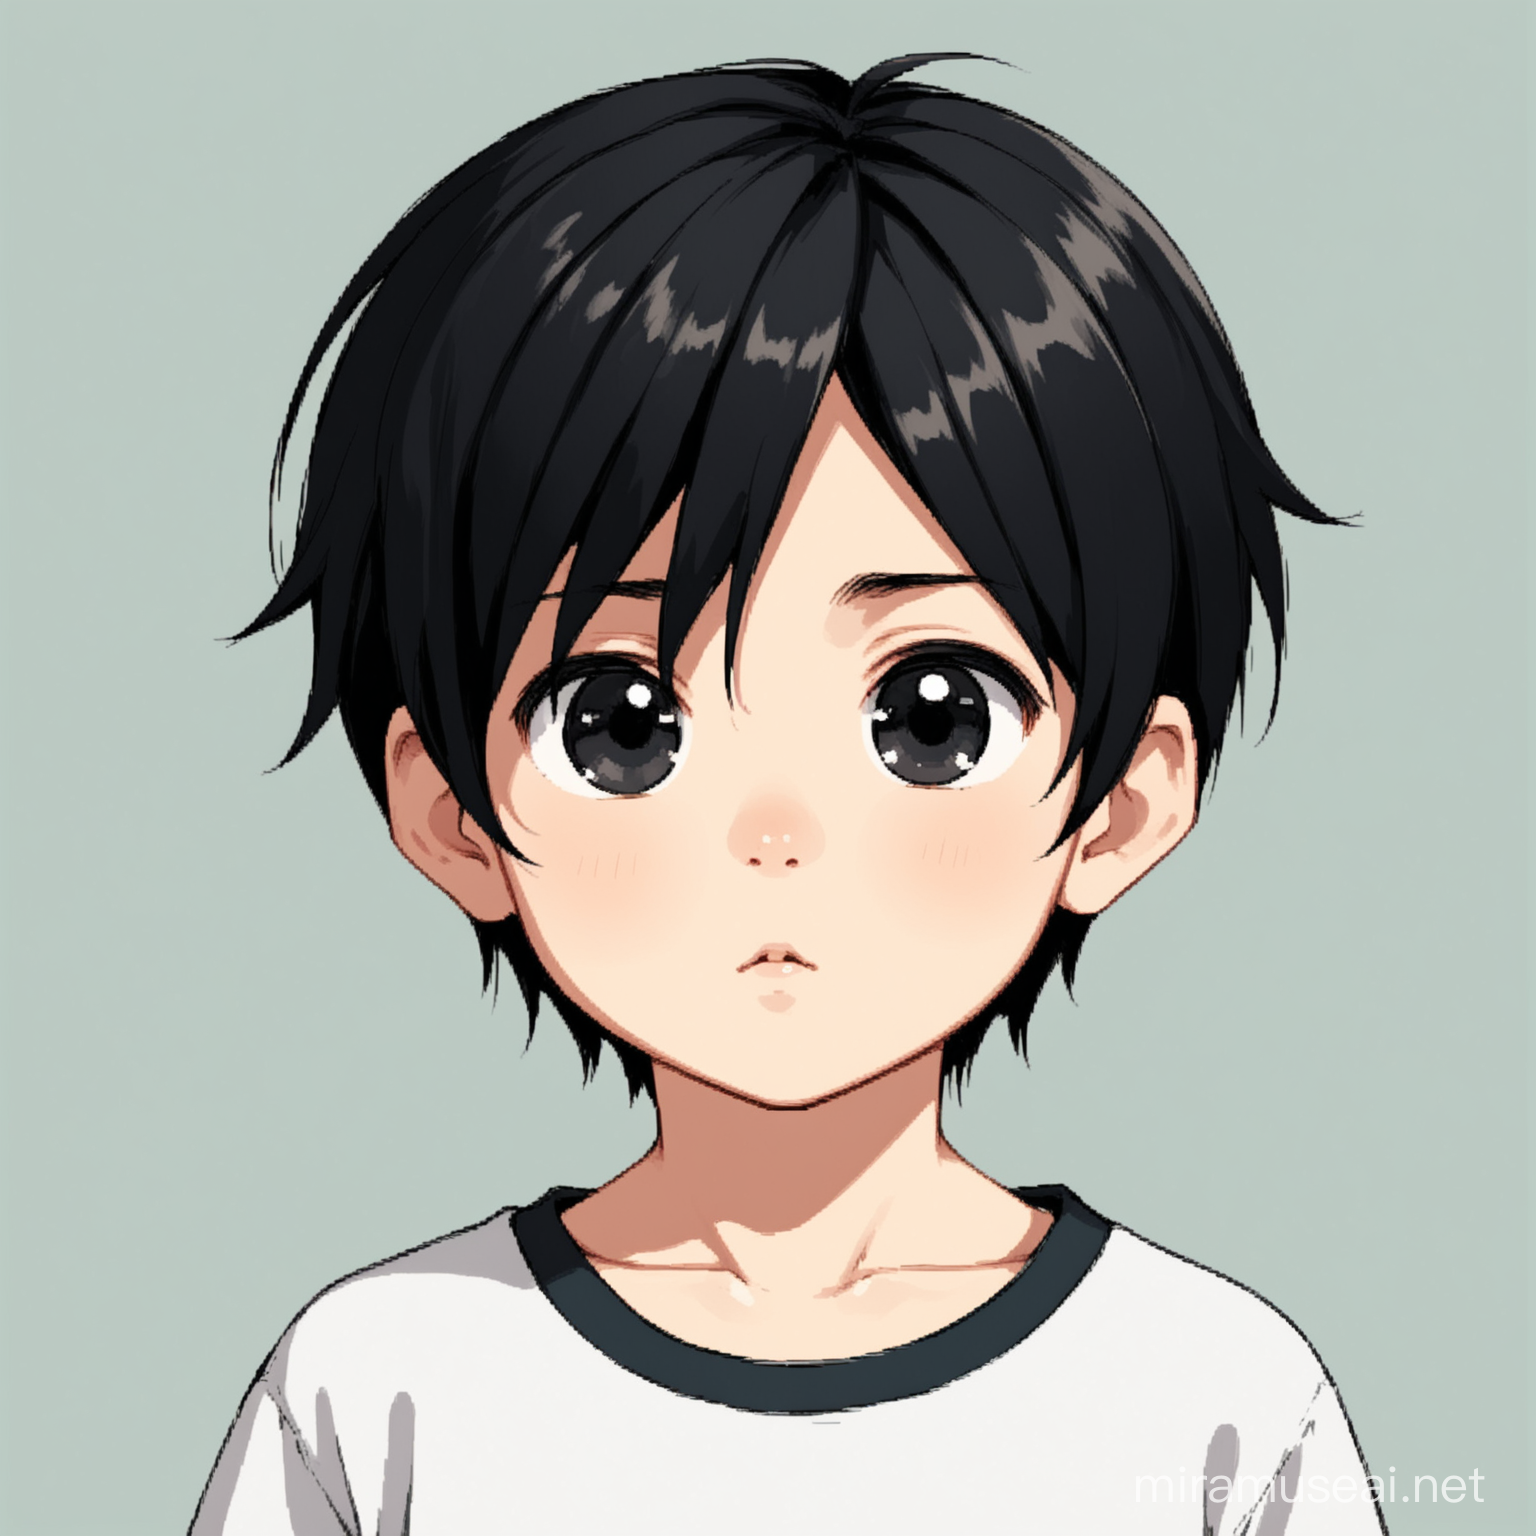 Generate animation picture of a small boy of six years old with black hair and nlack eye